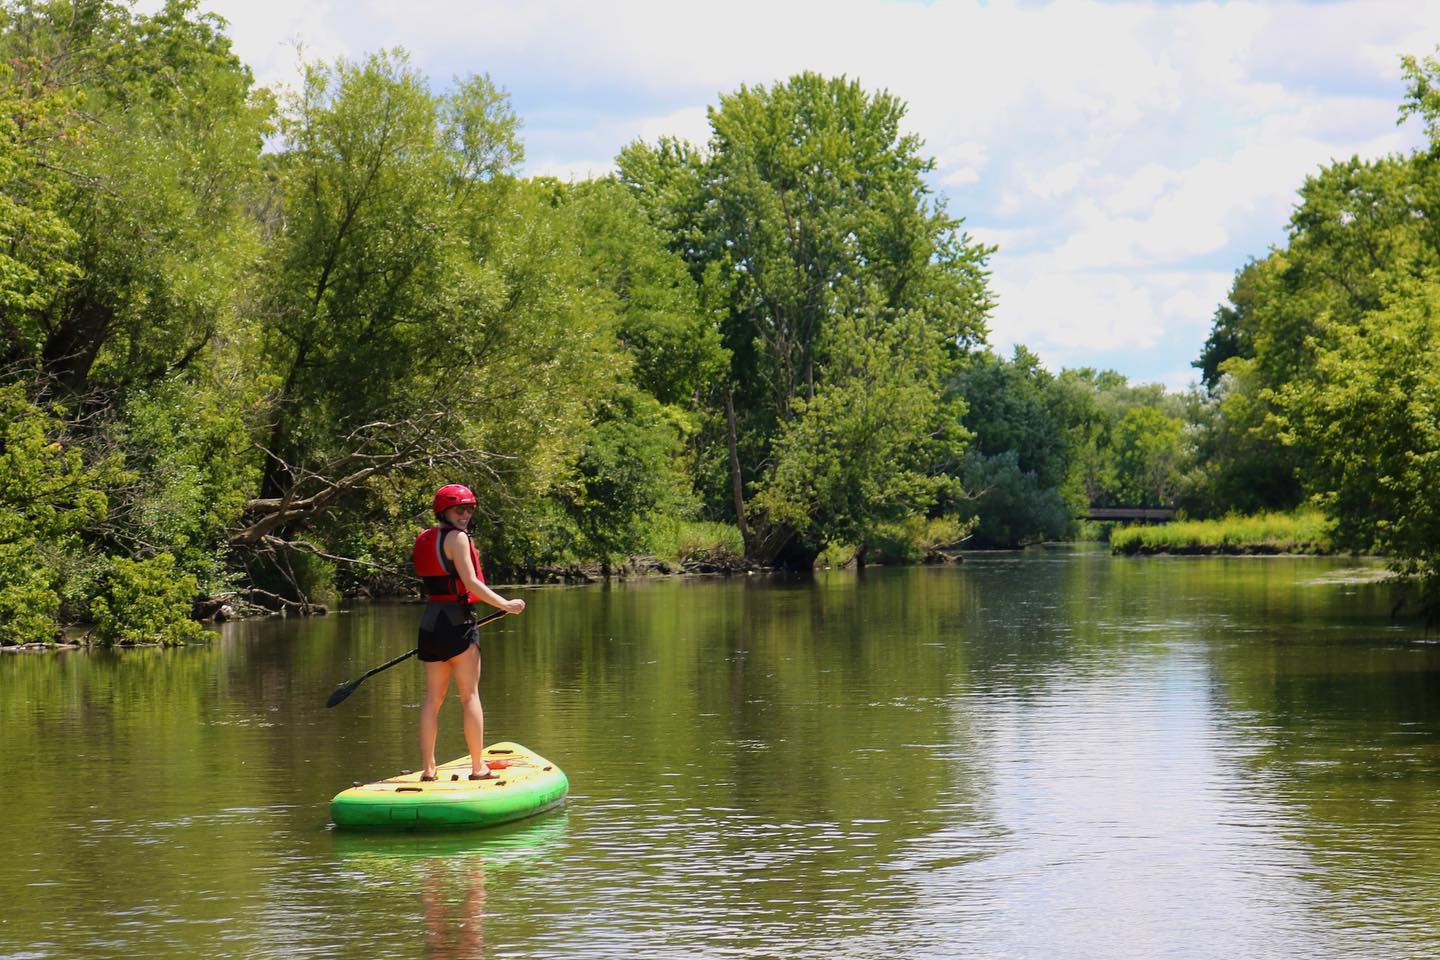 Ever tried stand-up paddle boarding? The DuPage River in Naperville is a great place to start! Book with us at www.napervillekayak.com 🌊